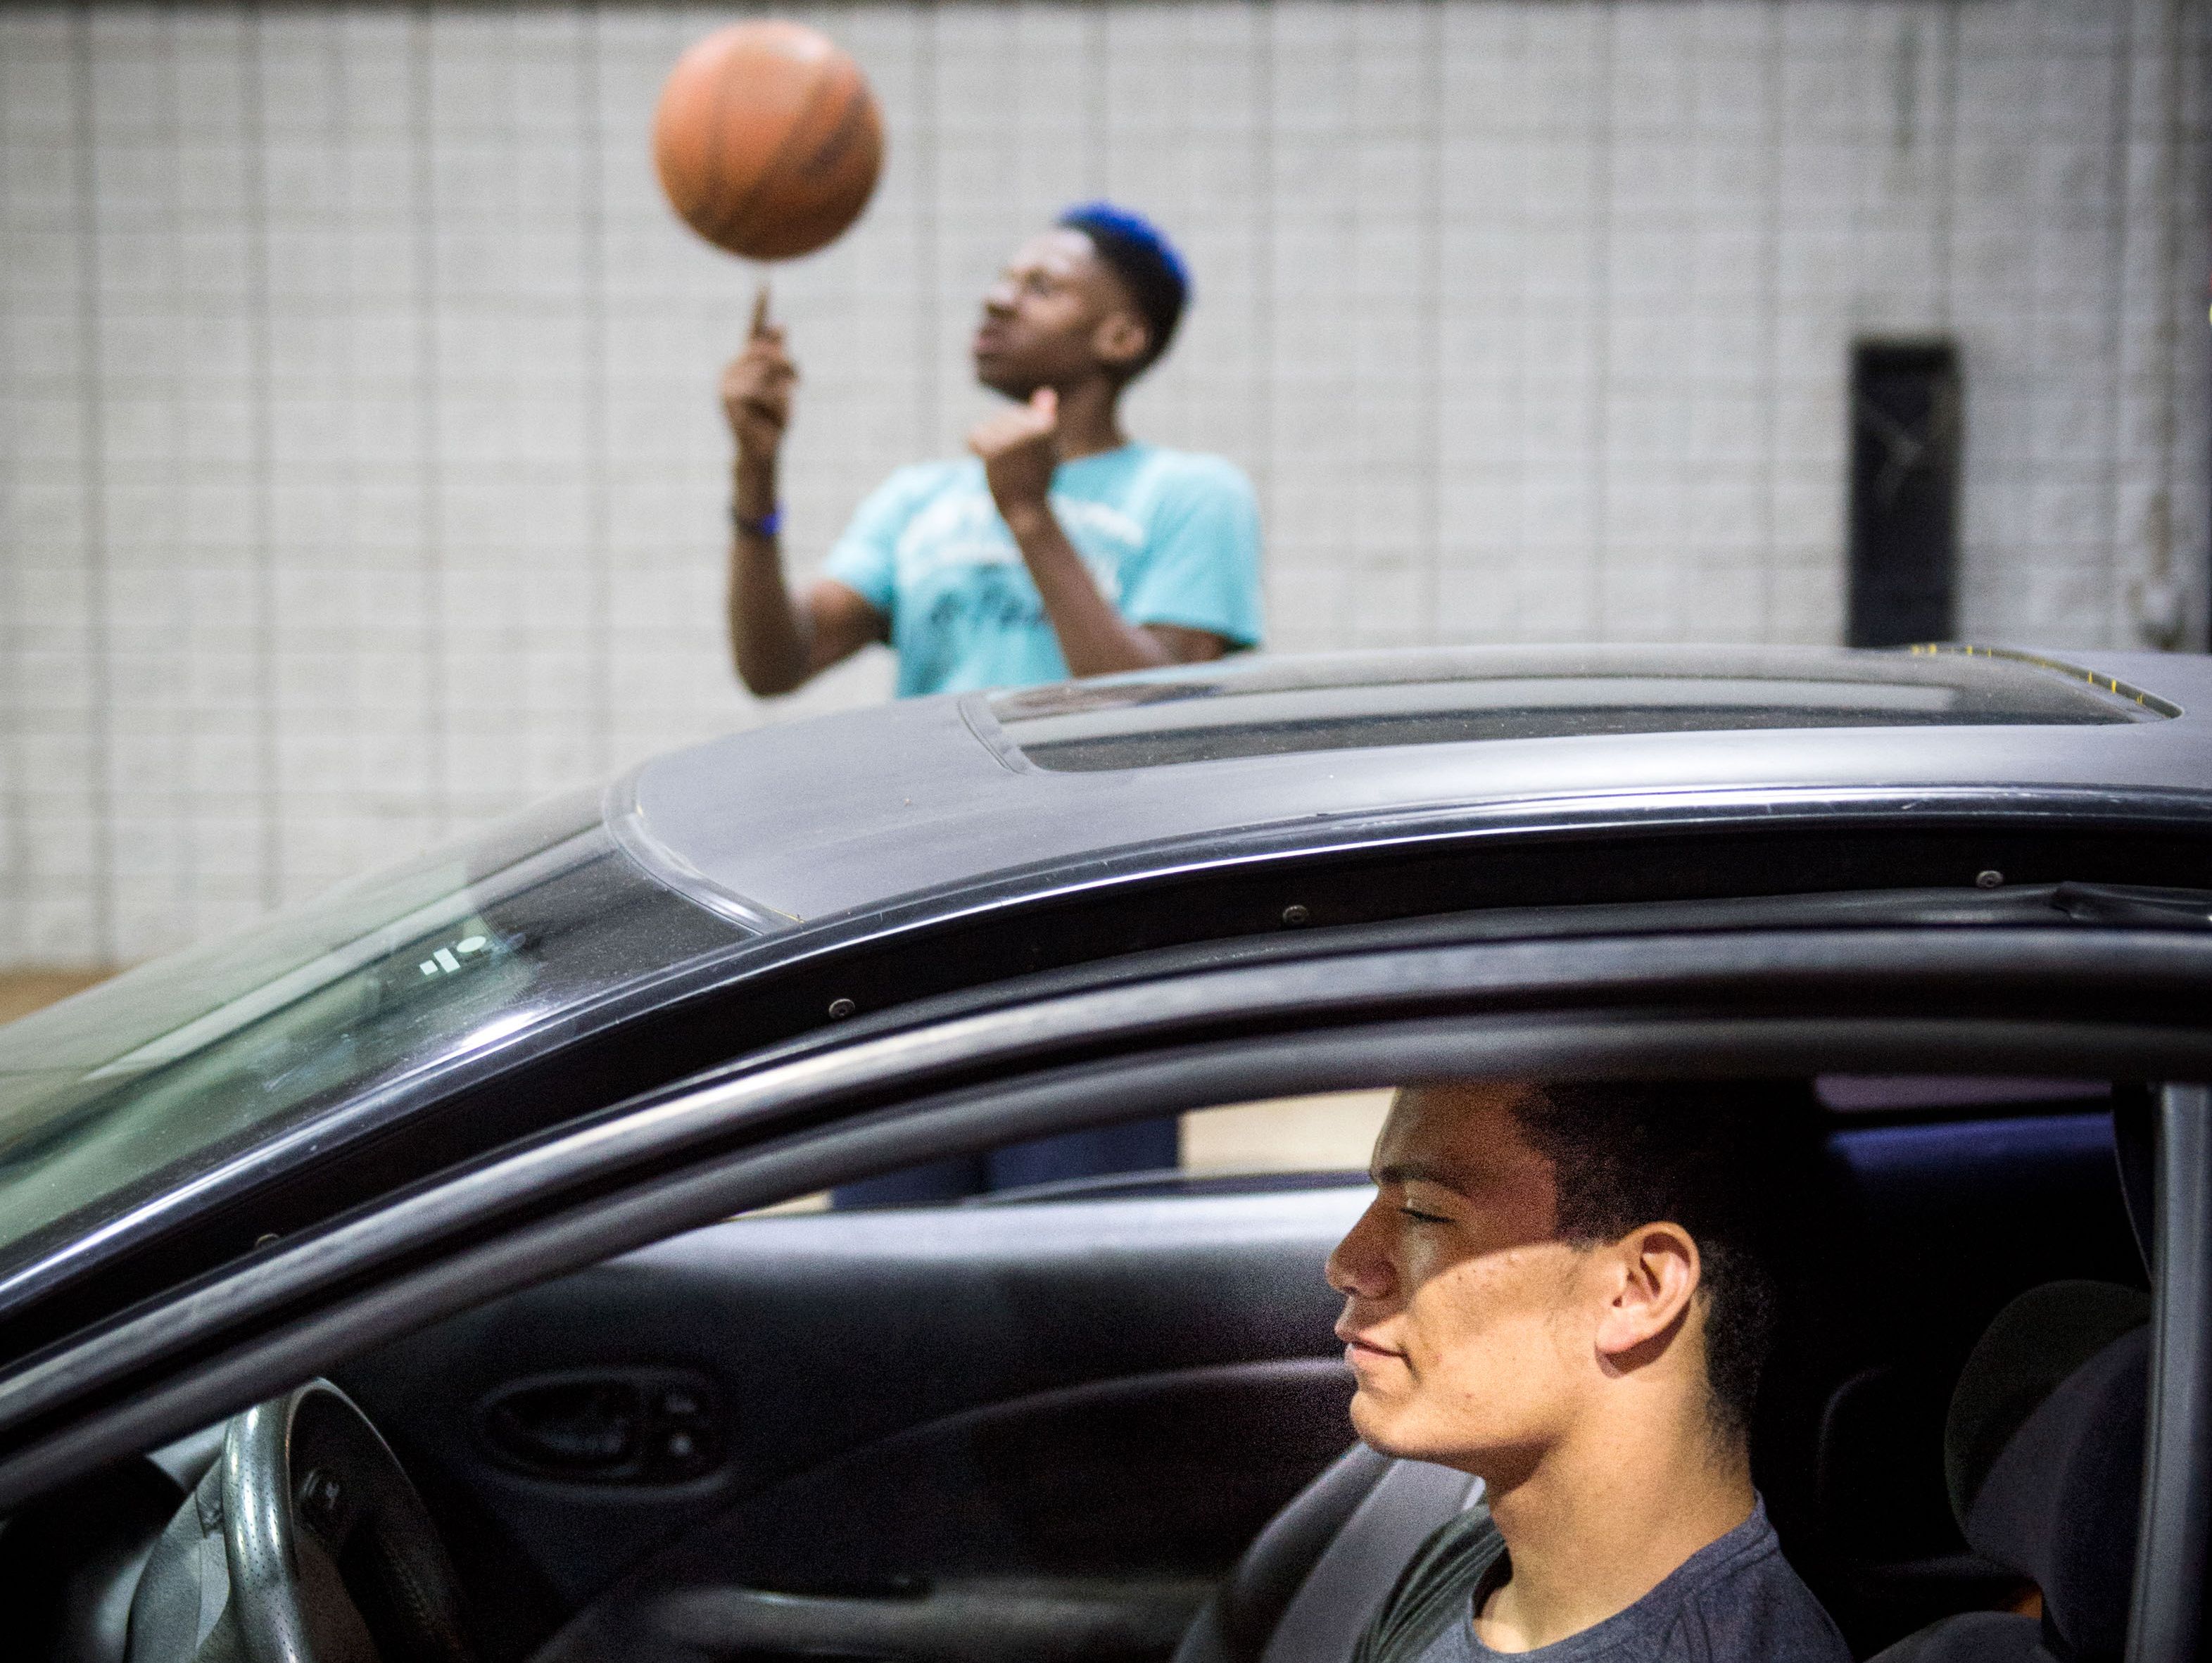 Shawn Murphy attempts to start his car as his friend Kevric Fifer, 17, spins a basketball, while experiencing car trouble on his way home from football practice, Tuesday, Oct. 25, 2016, in Nashville, Tenn.